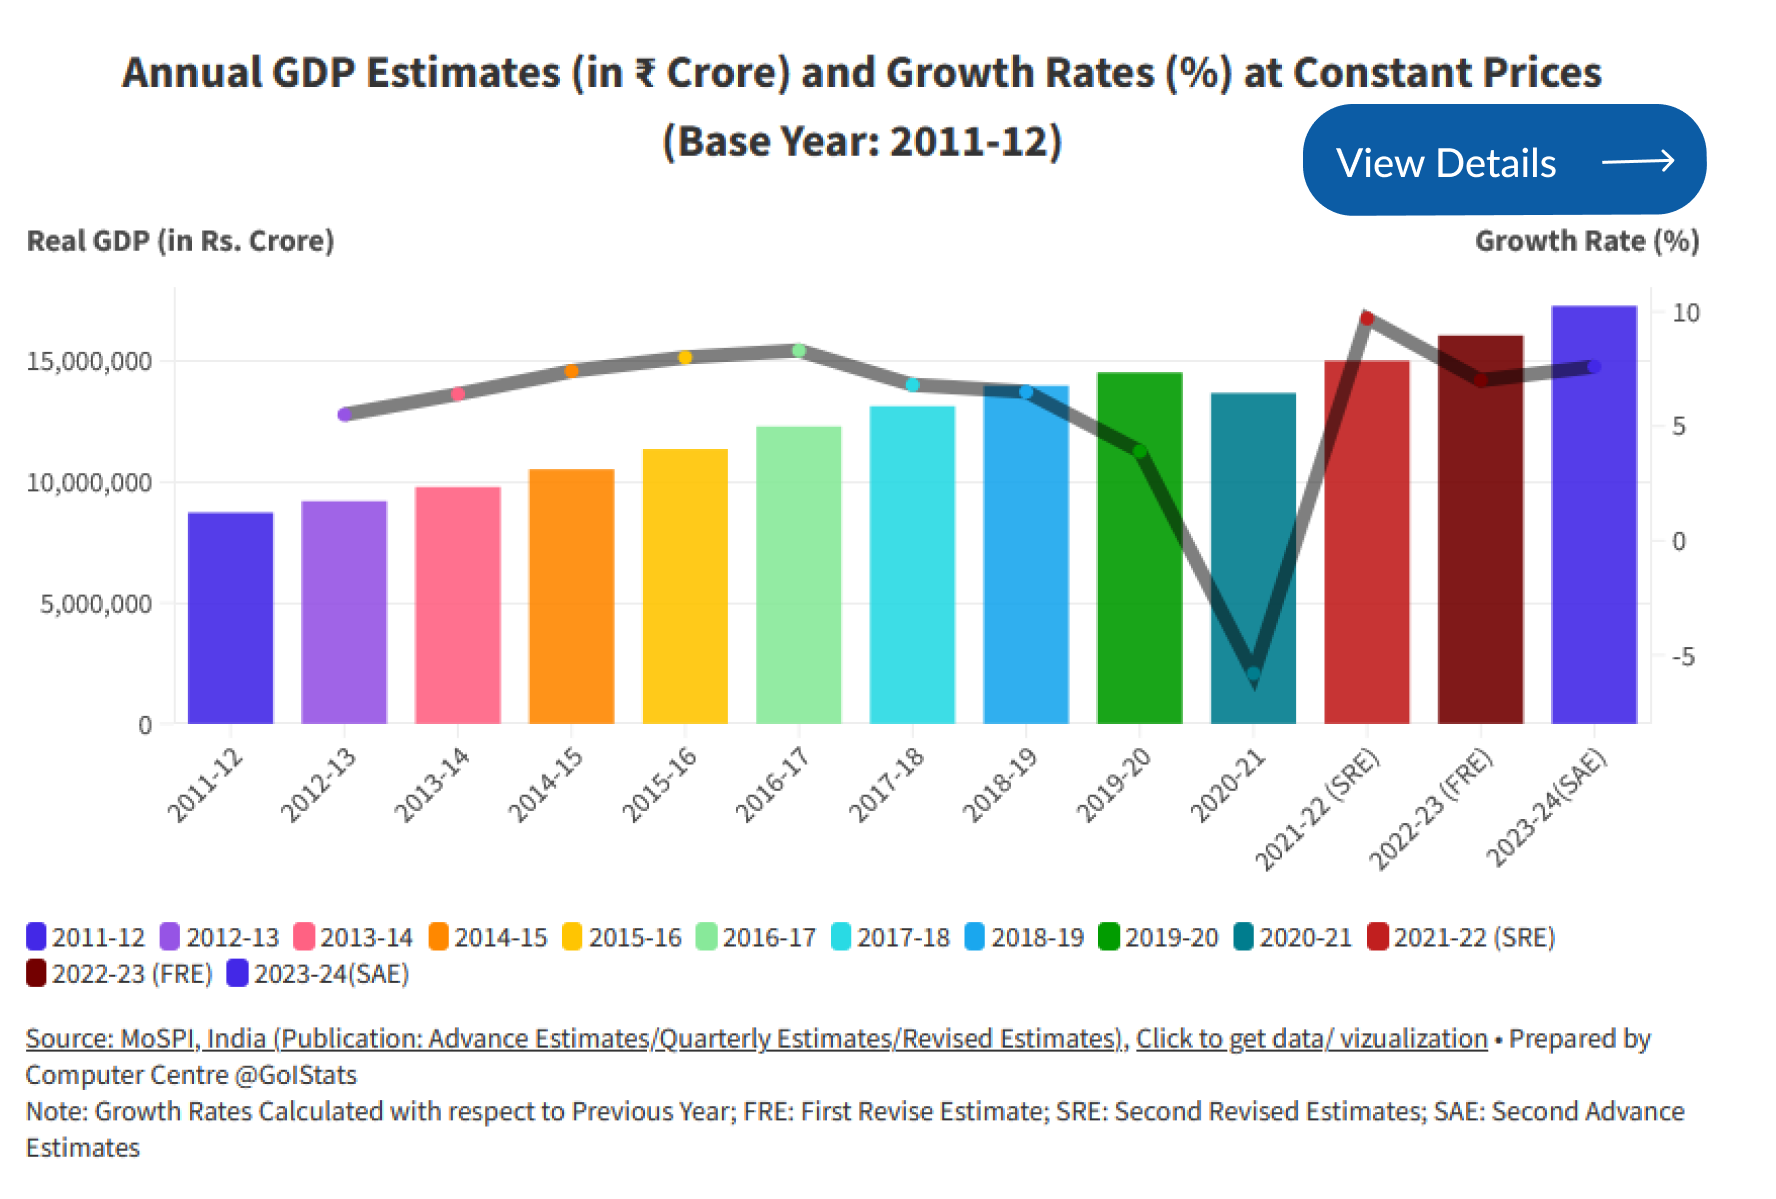 Annual GDP Estimates and Growth Rates at Constant Prices